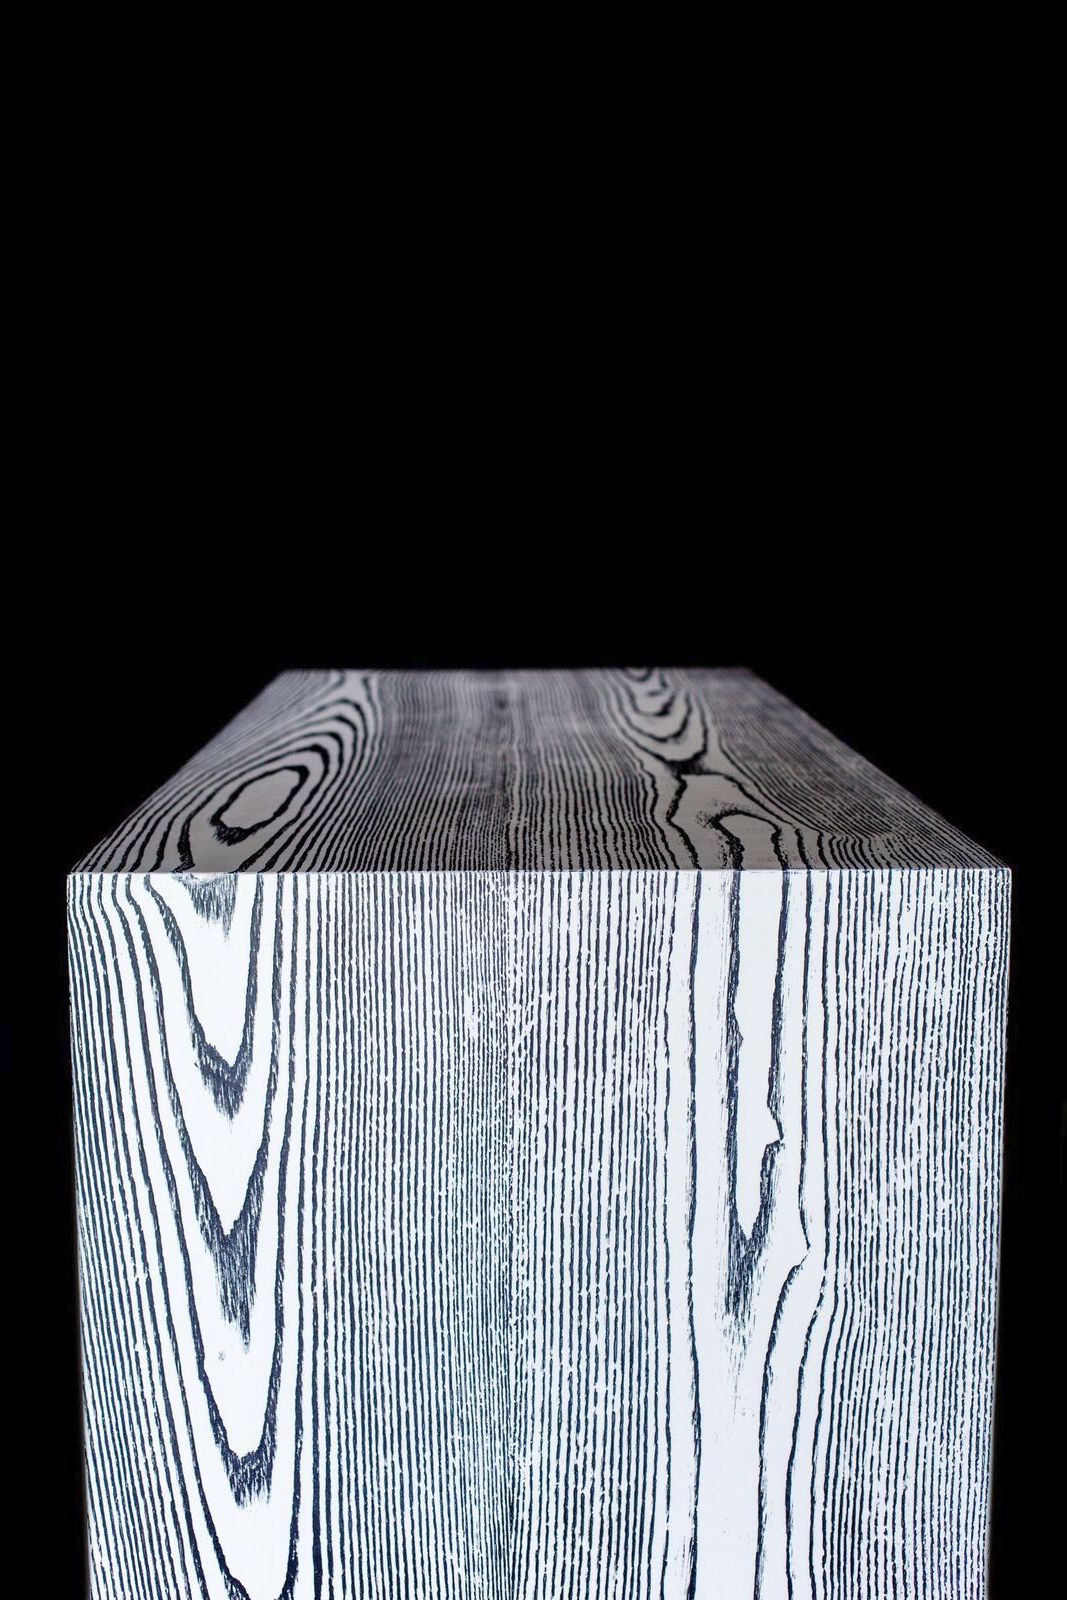 Newest Console Table From Our Waterfall Collection In Solid Ash Pertaining To White Grained Wood Hexagonal Console Tables (View 6 of 10)